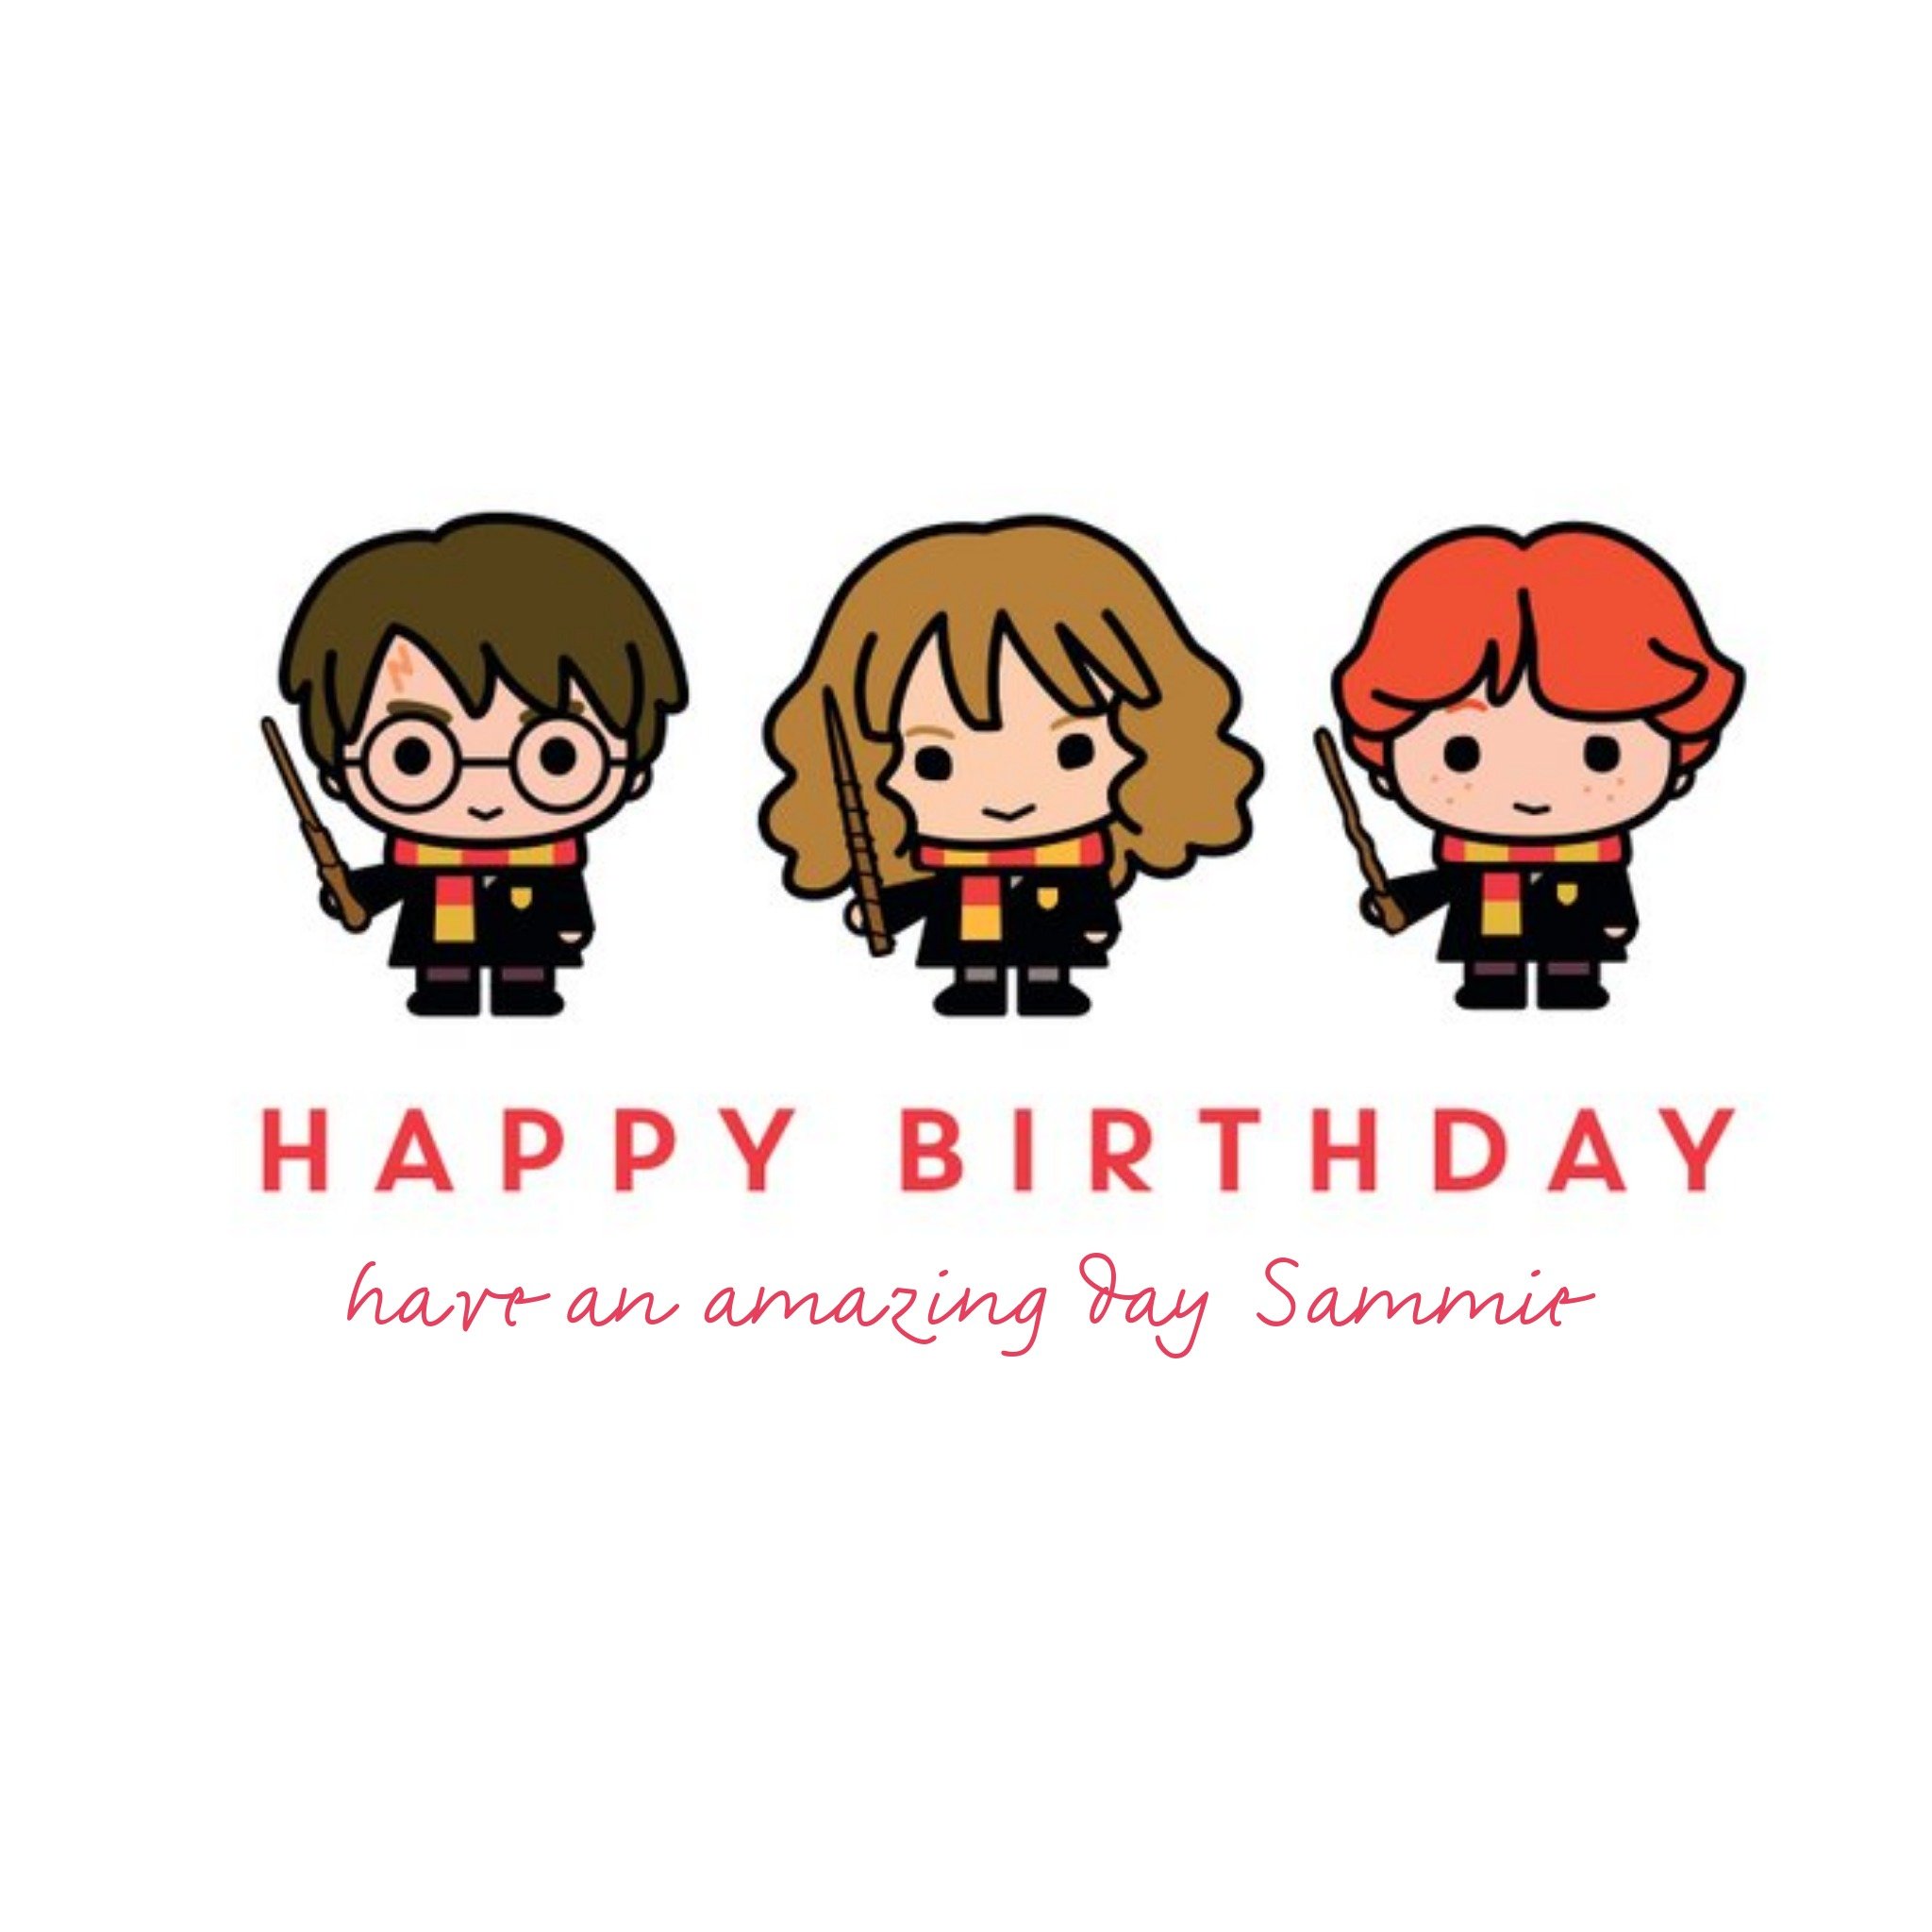 Harry Potter Birthday Card - Harry, Hermione And Ron, Large